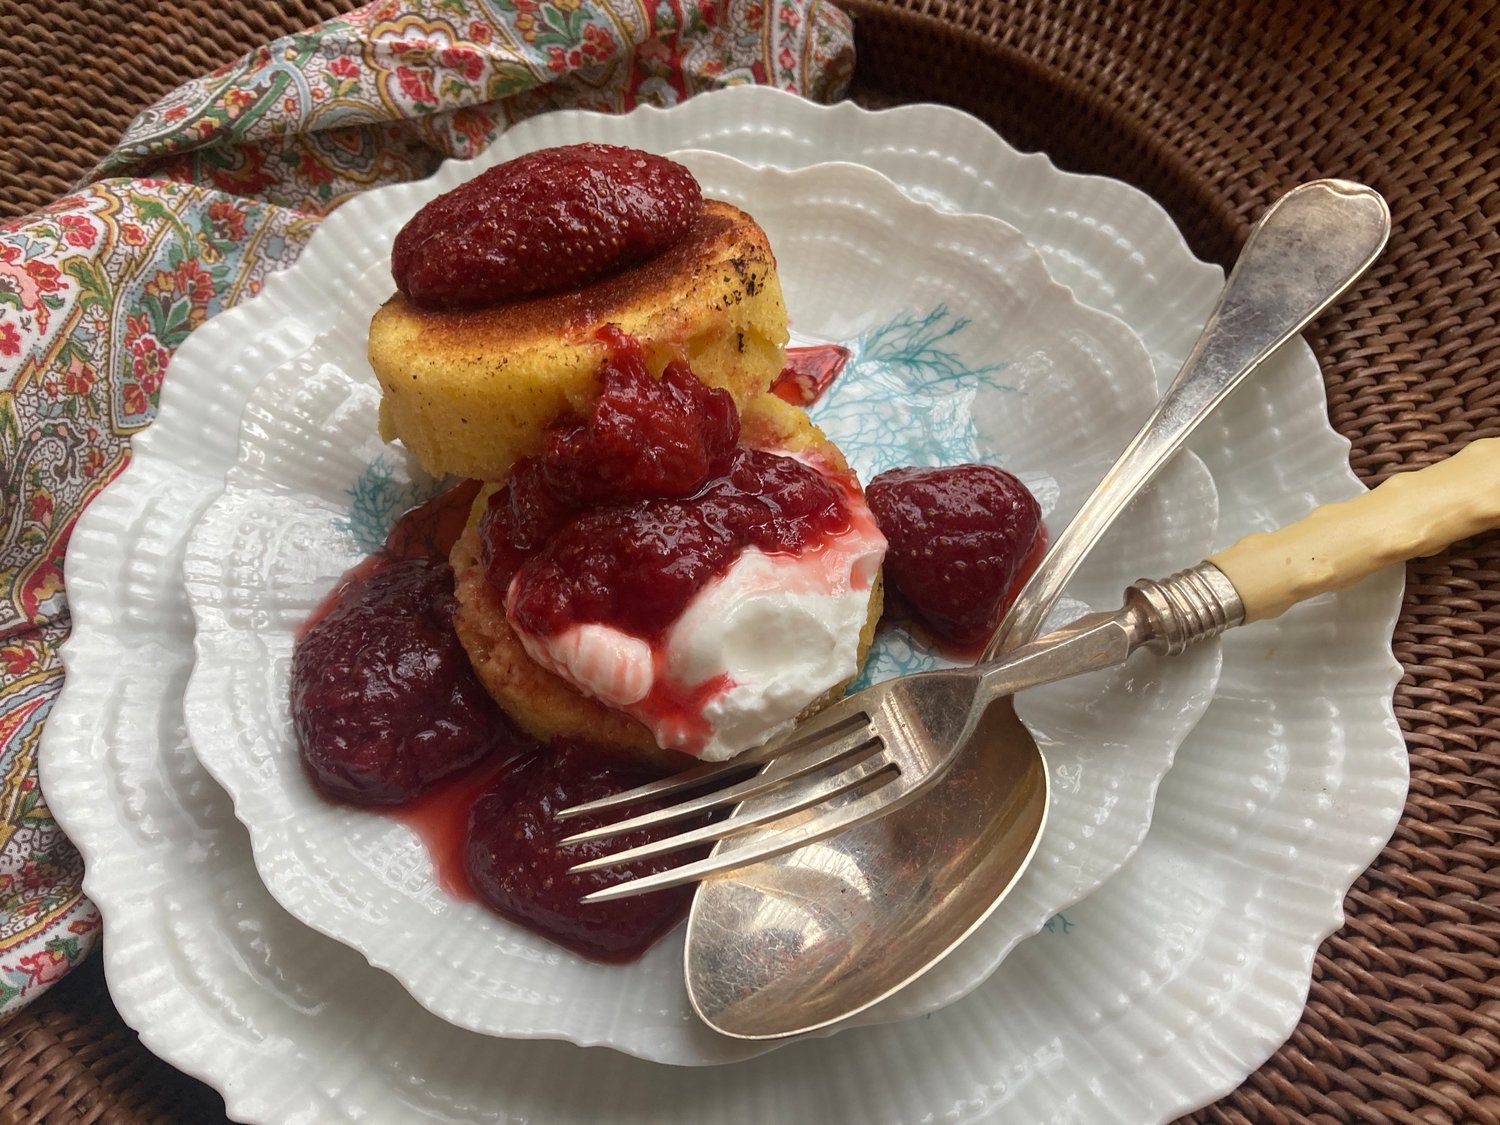 Edna Lewis’ corn muffins, baked into miniature cakes, provide the perfect platform for strawberry preserves.